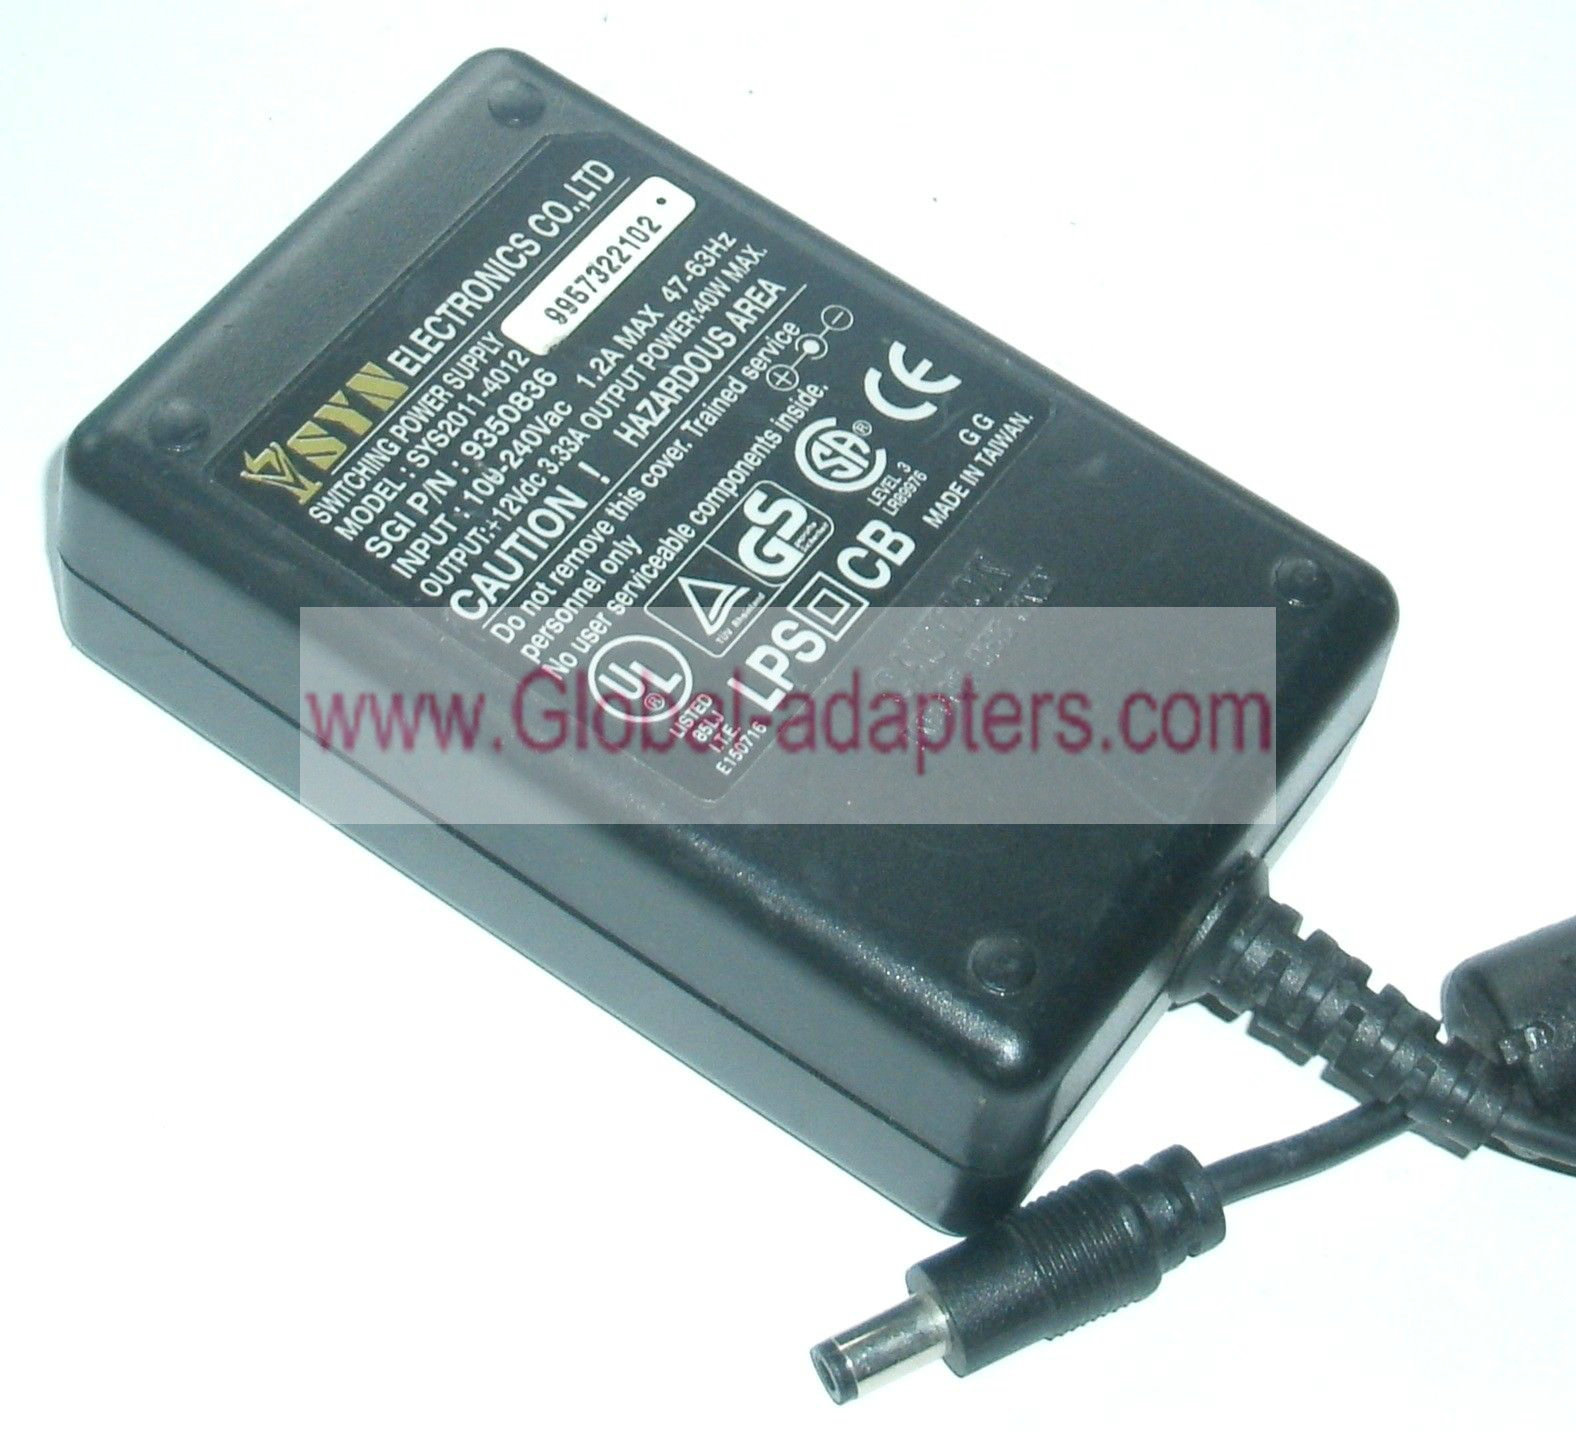 NEW SYN ELECTRONICS SWITCHING POWER SUPPLY SYS2011-4012 12V 3.33A 40W 9350836 ac adapter - Click Image to Close